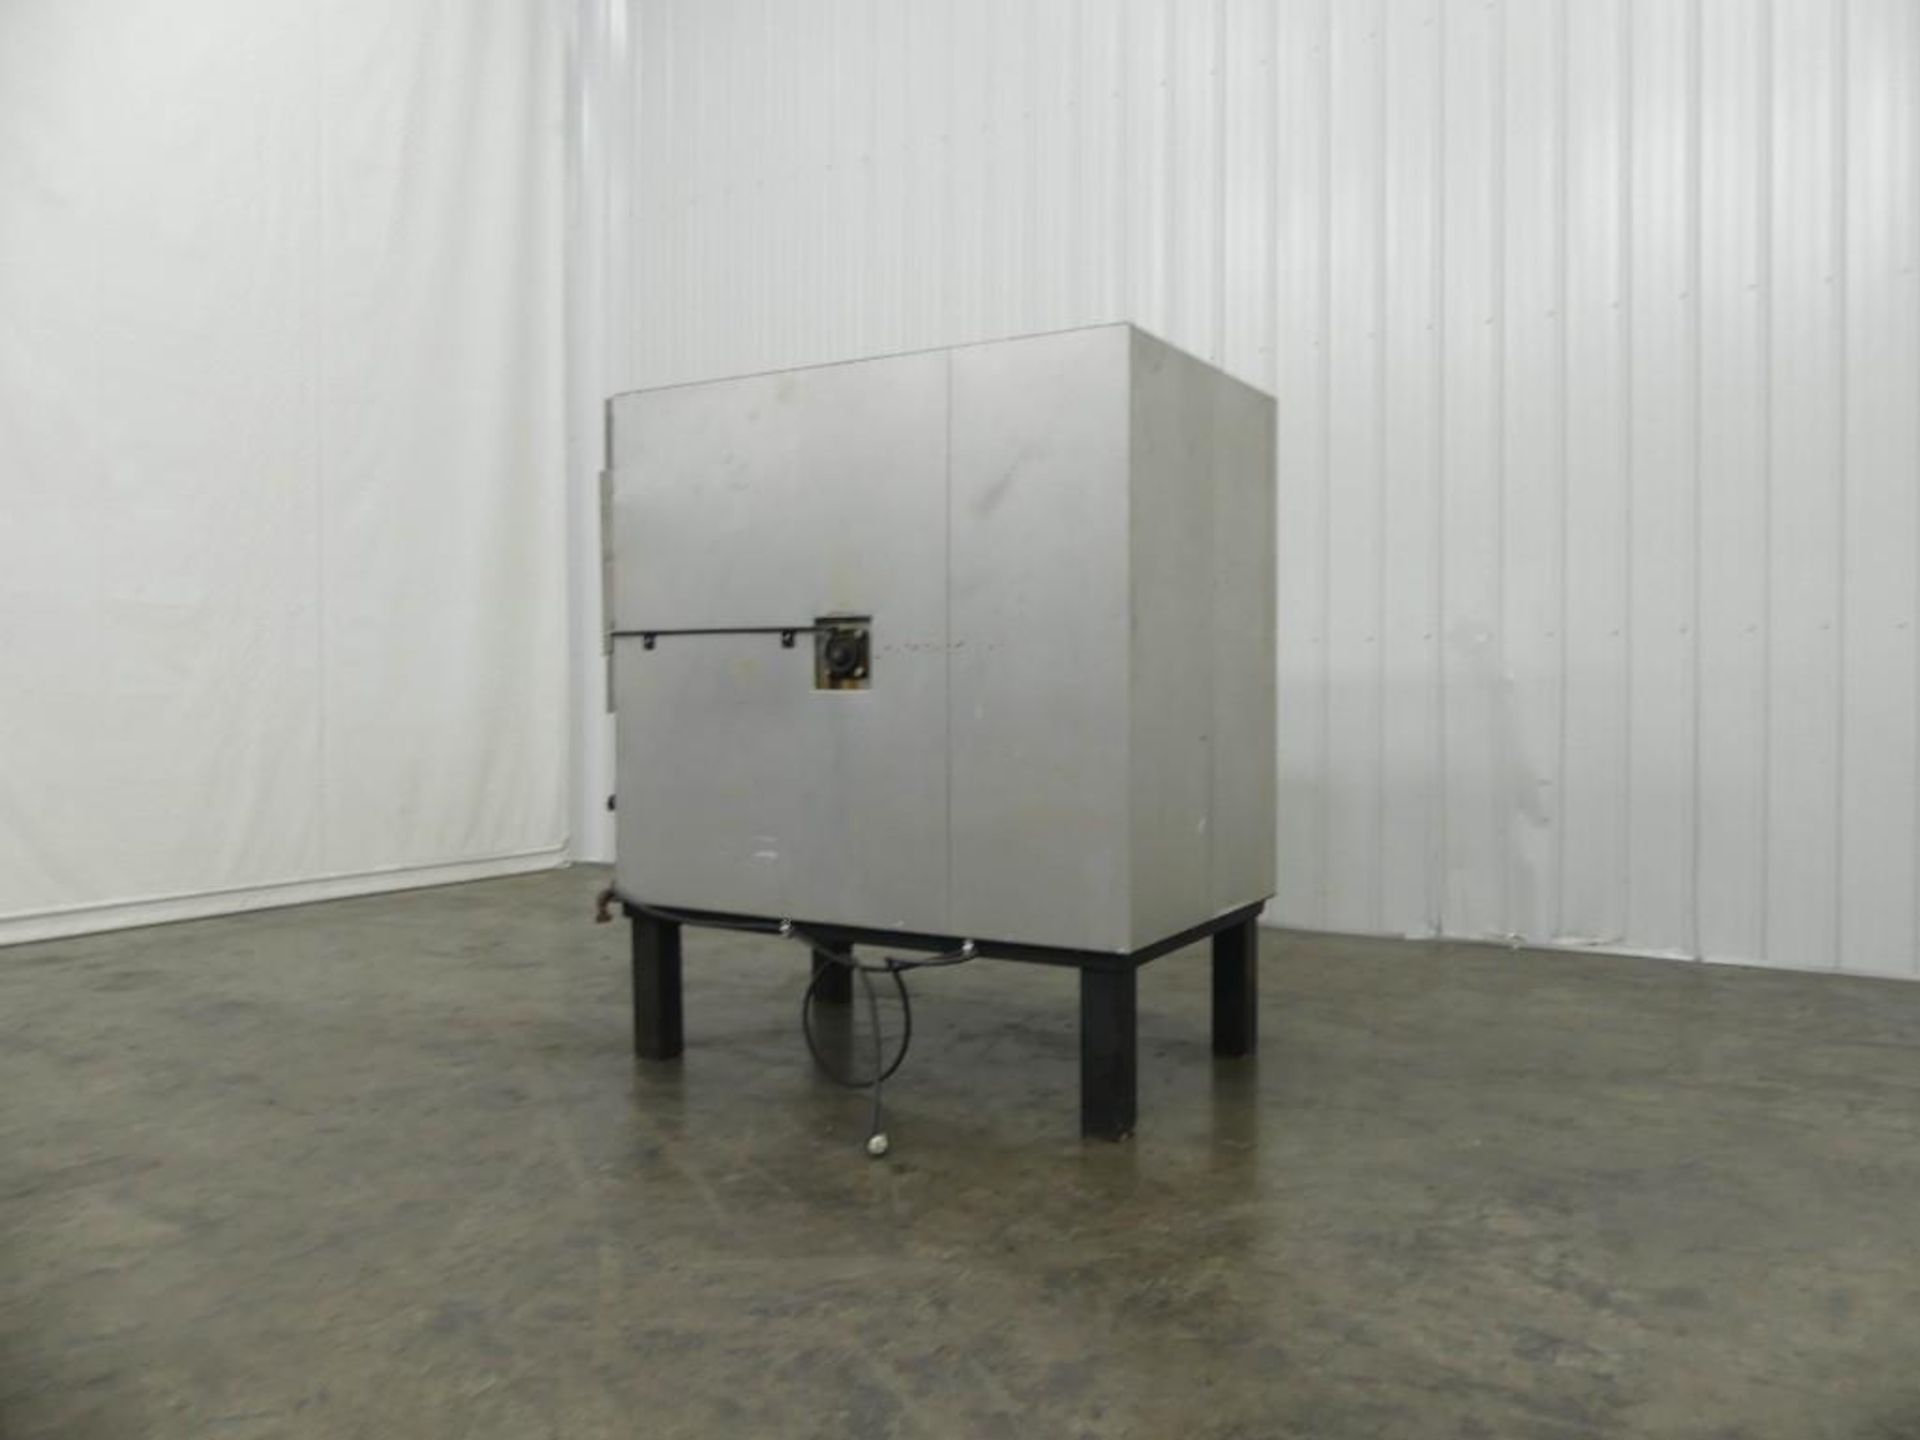 Bolling 500 M 5 Tray Revolving Rack SS Oven - Image 5 of 7